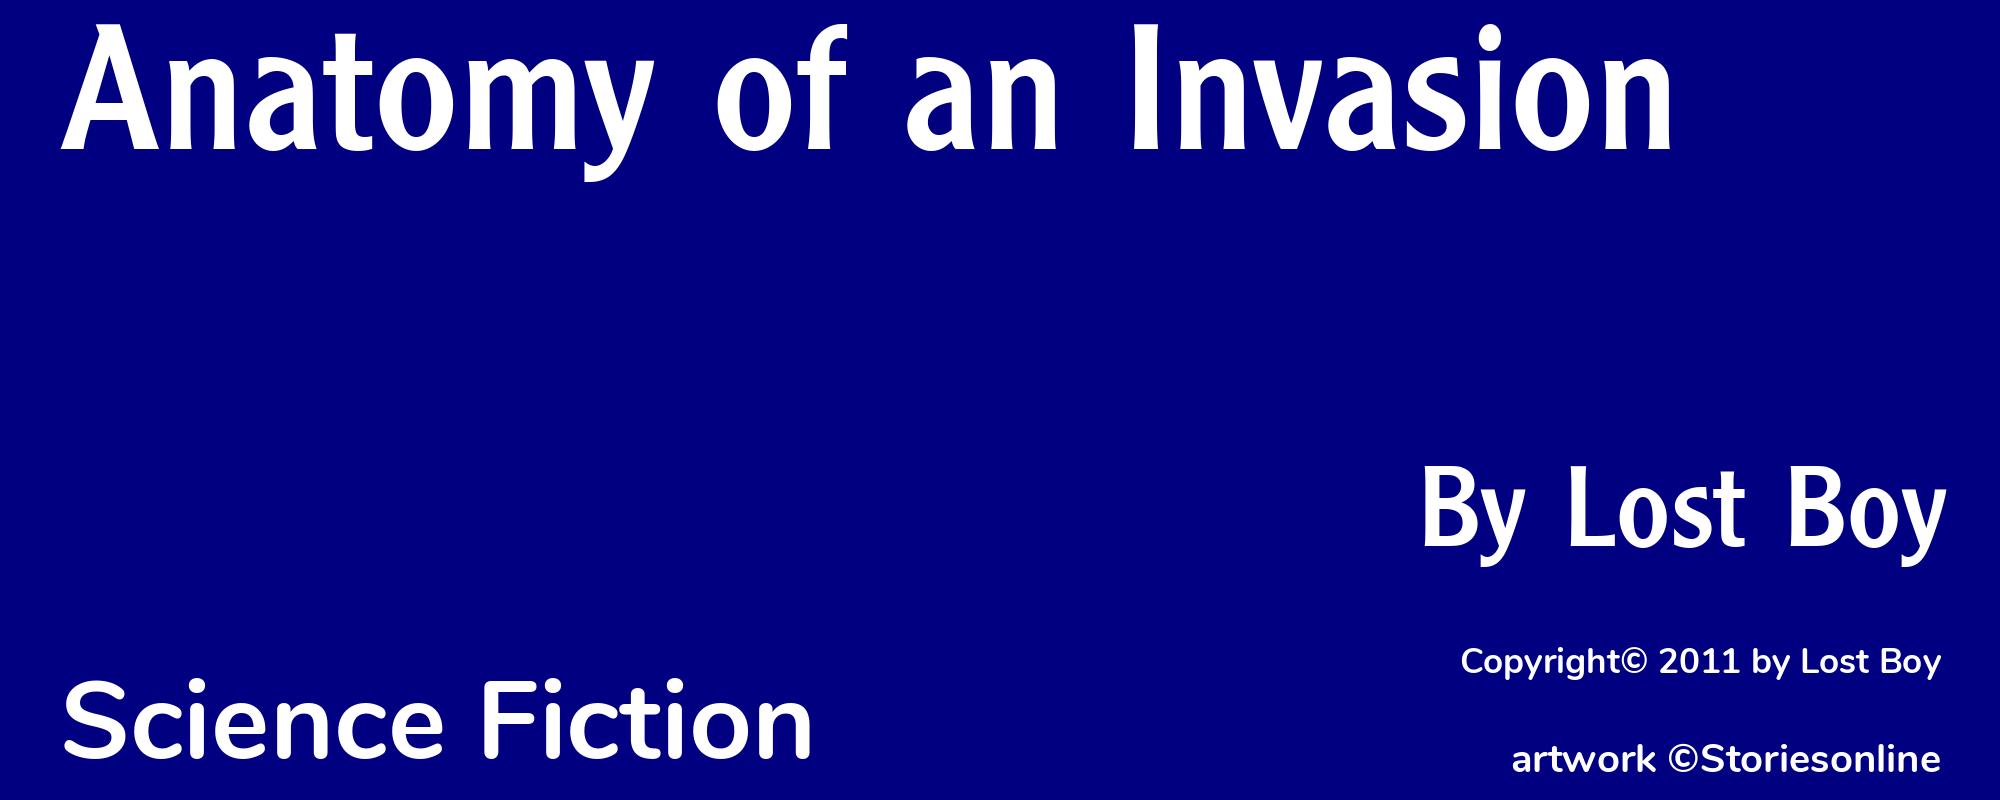 Anatomy of an Invasion - Cover